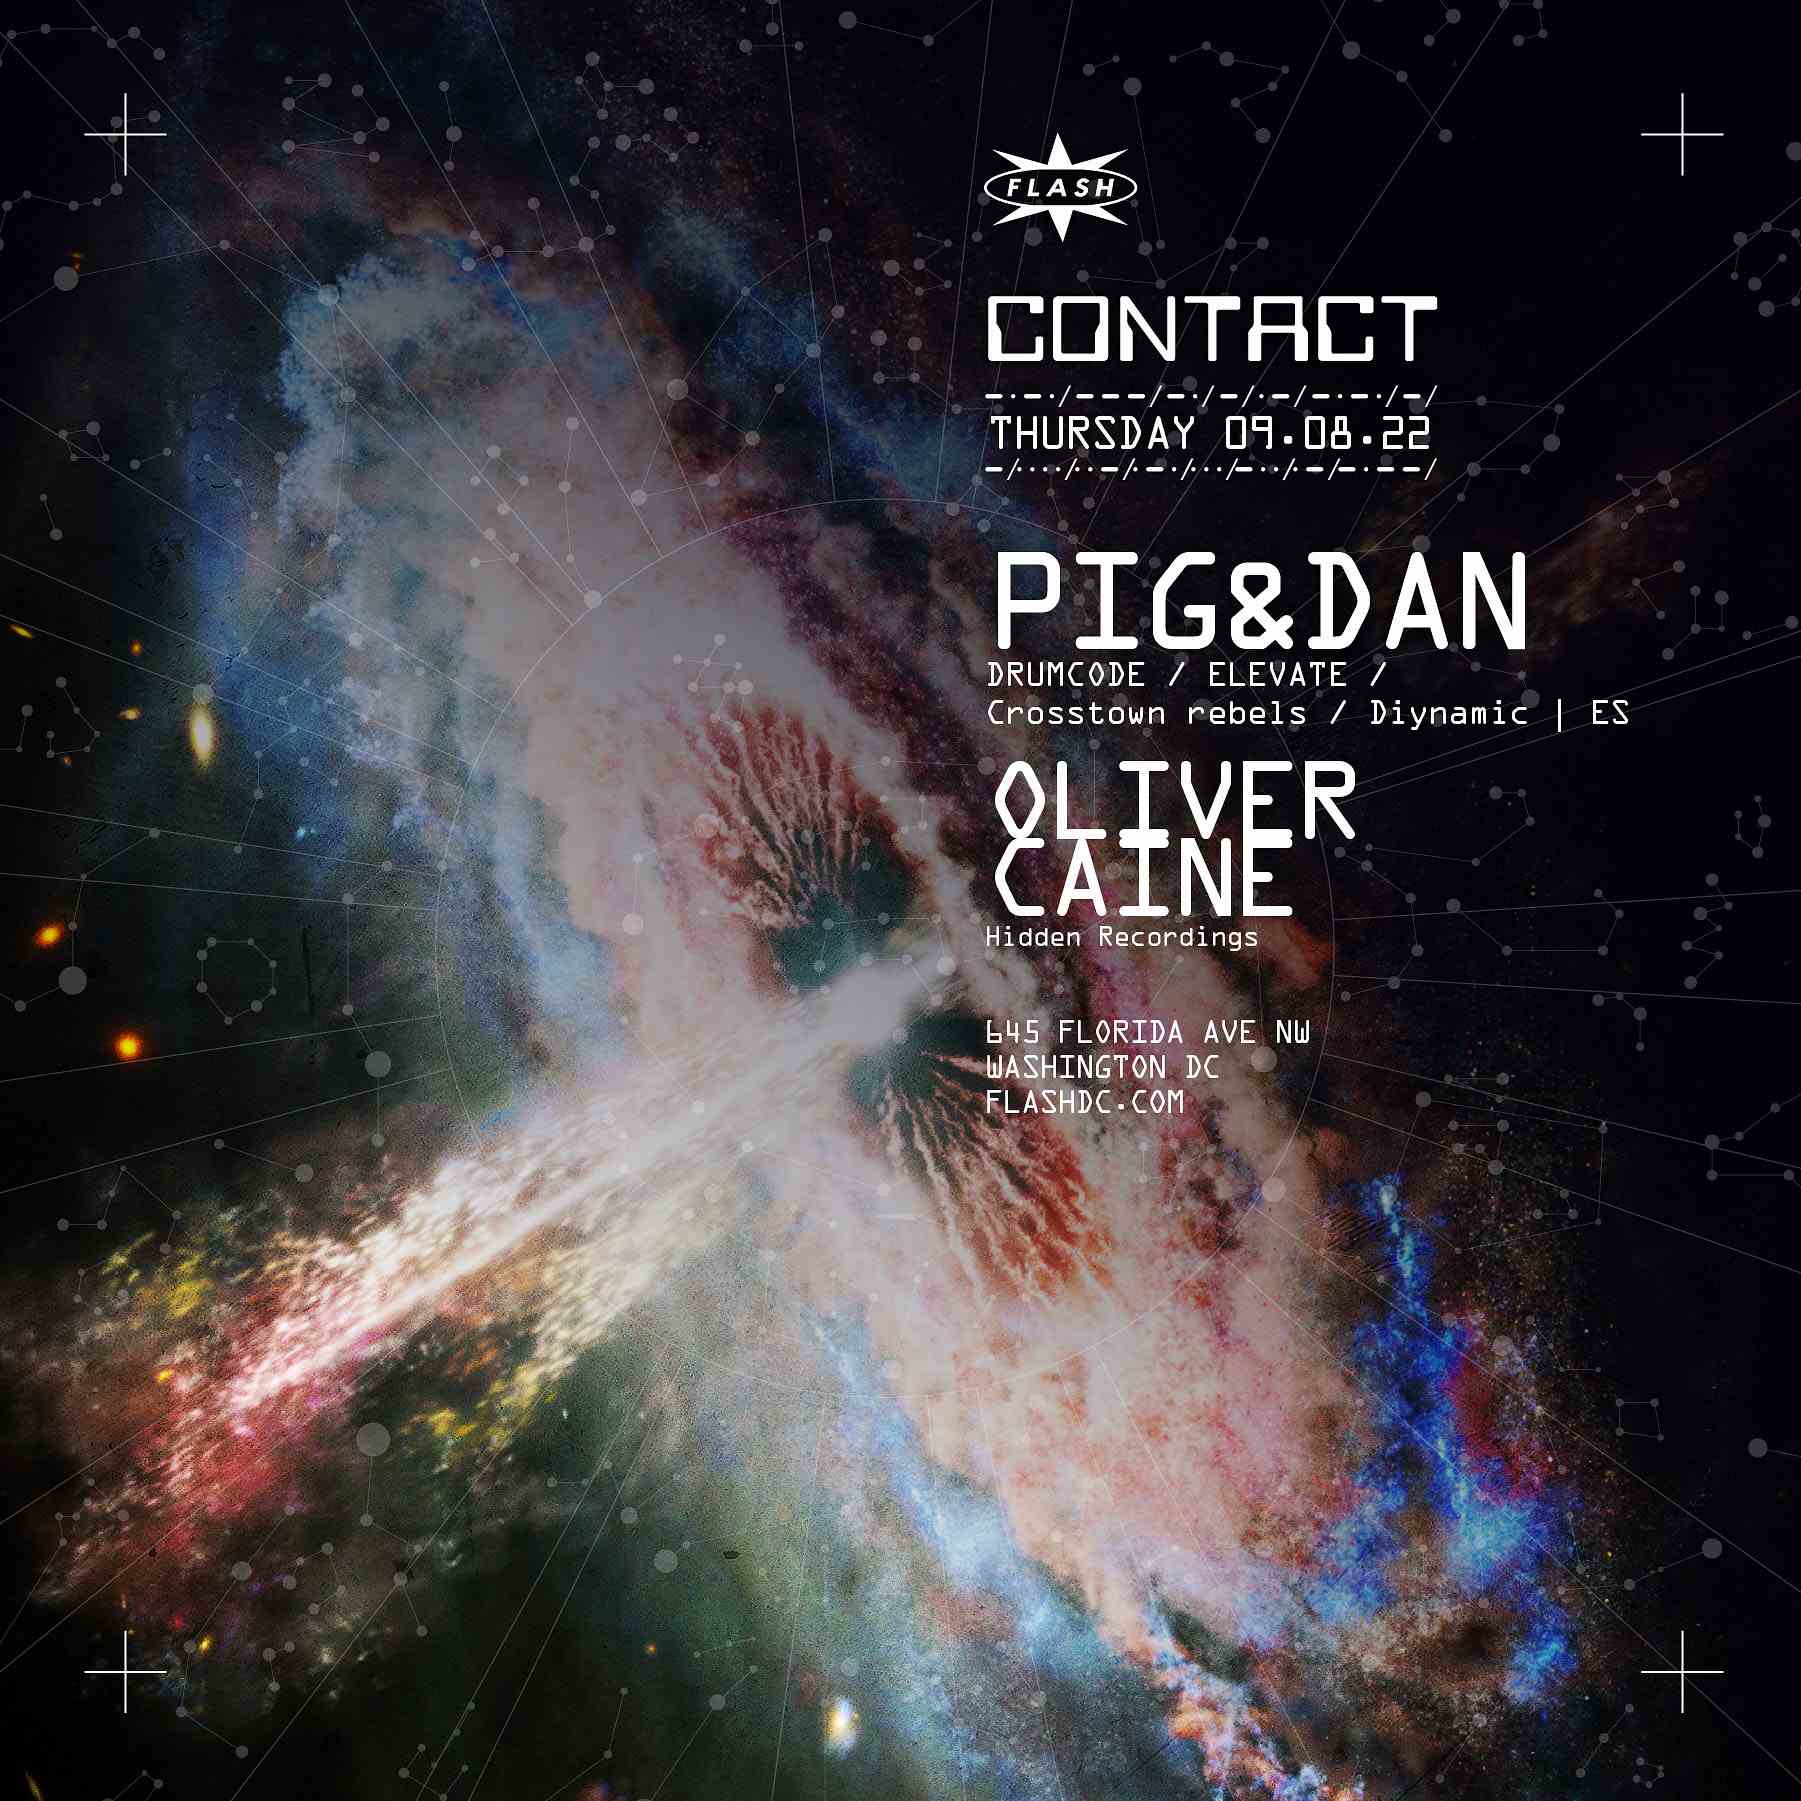 Event image for CONTACT: Pig&Dan - Oliver Caine